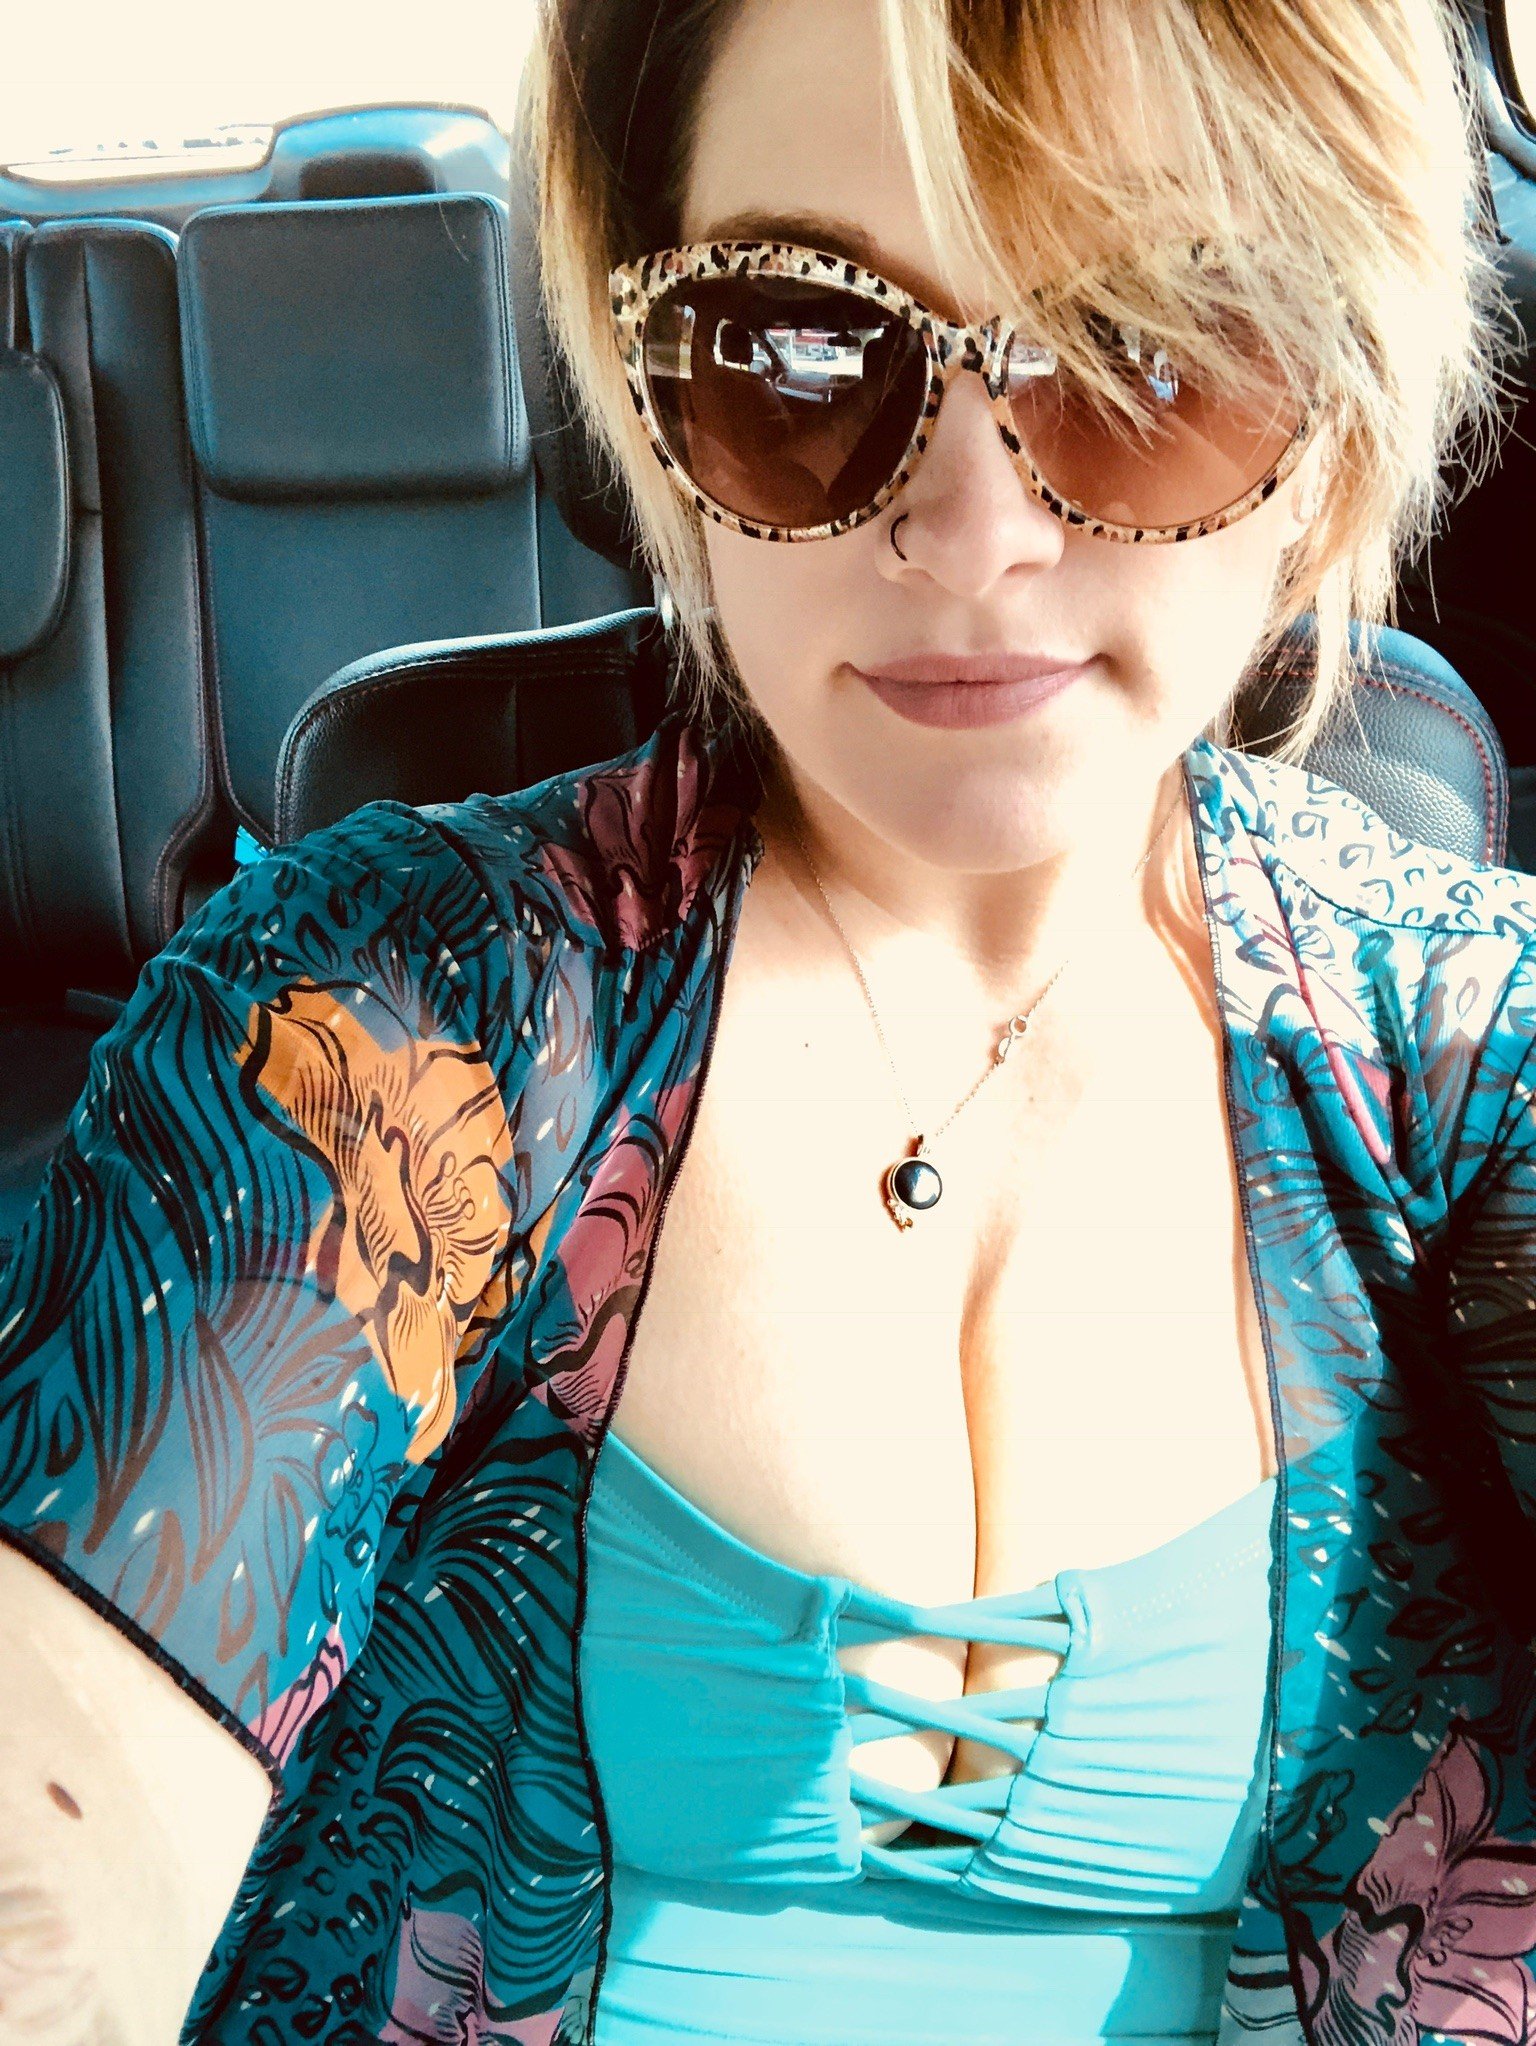 Photo by CaligirlxoxoOnlyFans with the username @CaligirlxoxoOnlyFans,  August 22, 2020 at 2:46 PM. The post is about the topic Amateurs and the text says 'Headed to the beach 🌞I was very naughty last night 😈 I hope there is some hot guys and girls at the beach onlyfans.com/caligirlxoxo #onlyfansnewbie #onlyfansgirl #russian #sexy #feetpicsforsale #onlyfans #ashley #vixen'